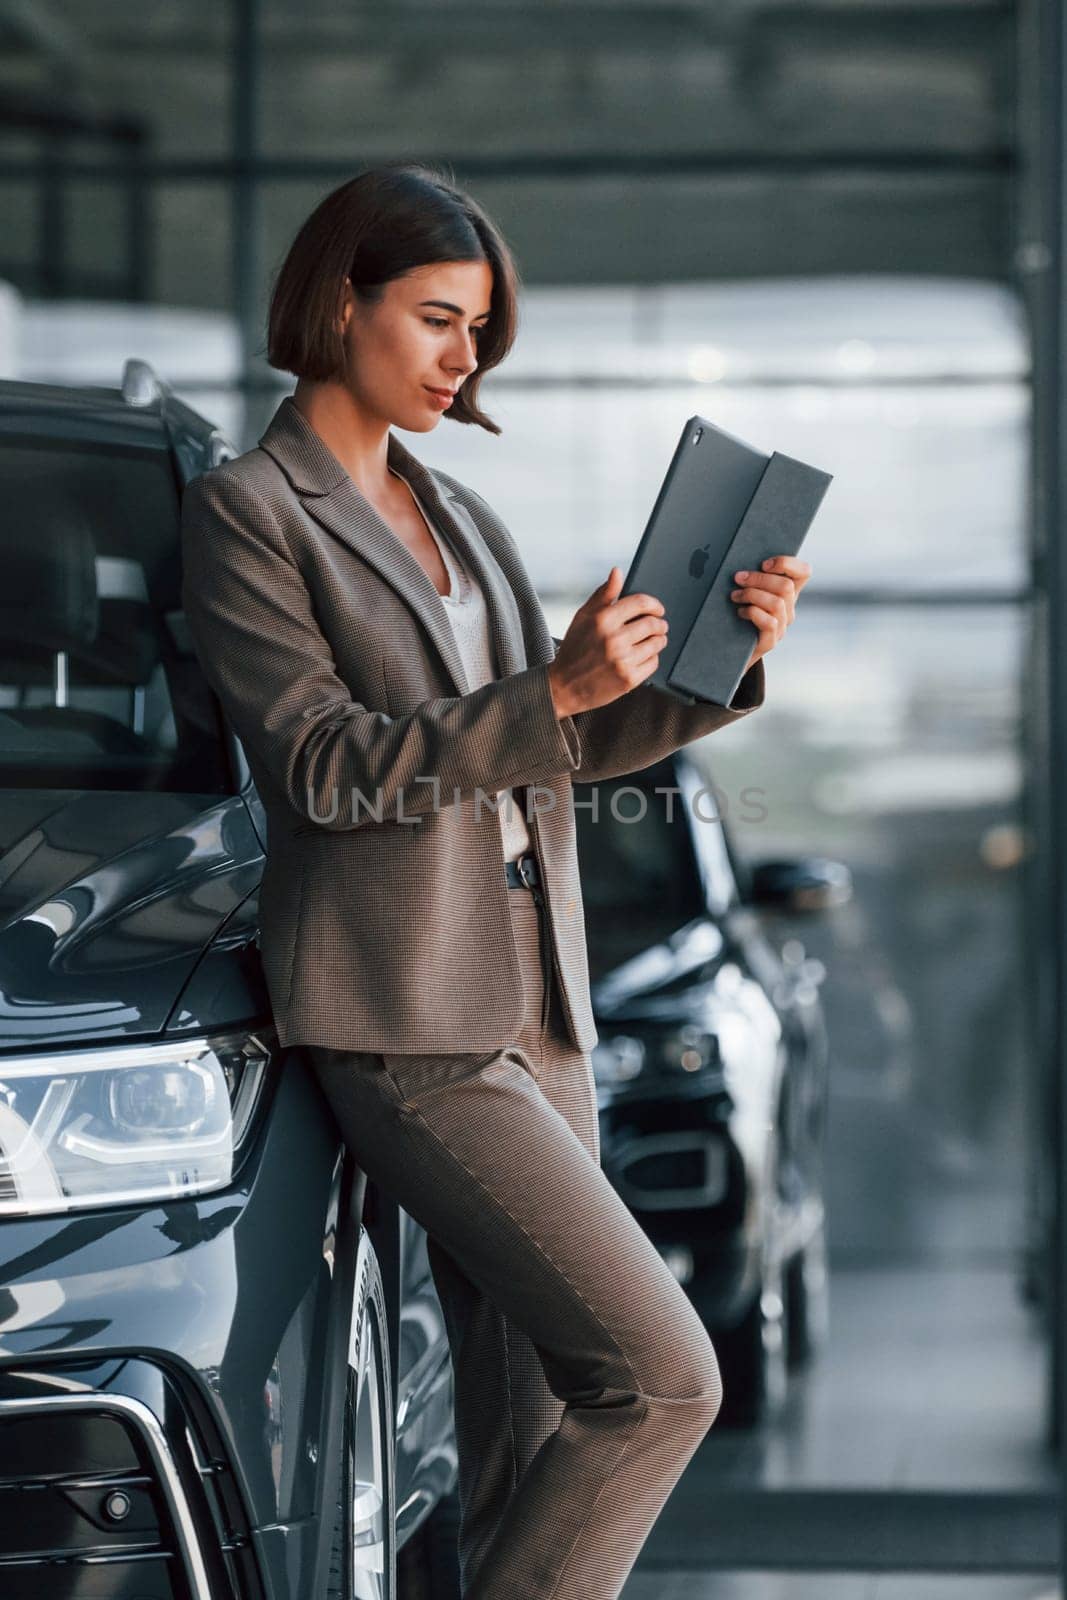 With tablet in hands. Woman is indoors near brand new automobile indoors.